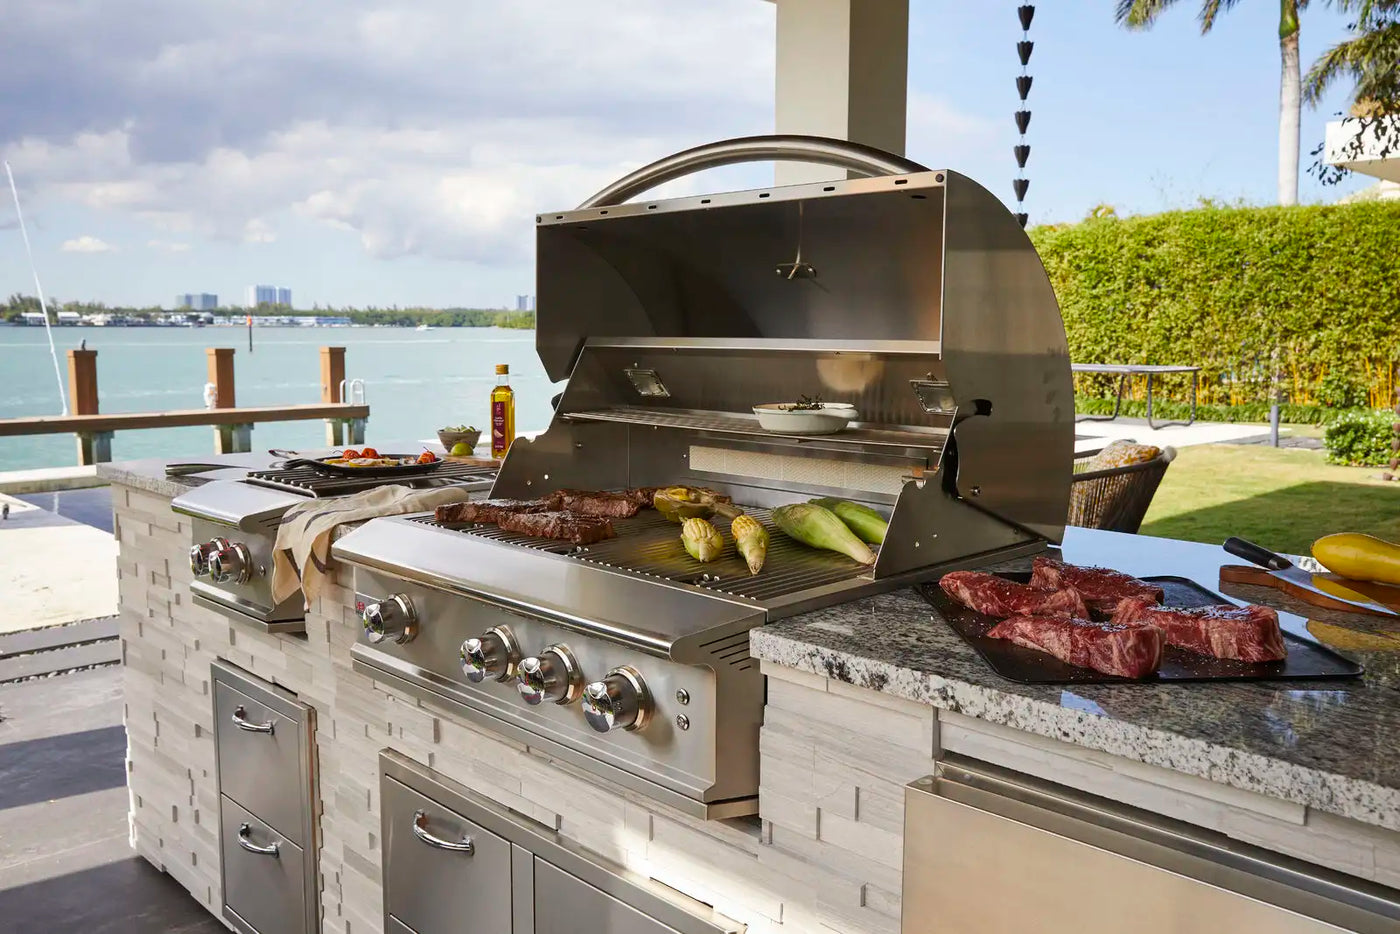 blaze grill and outdoor kitchen with delicious looking barbecue near a lake